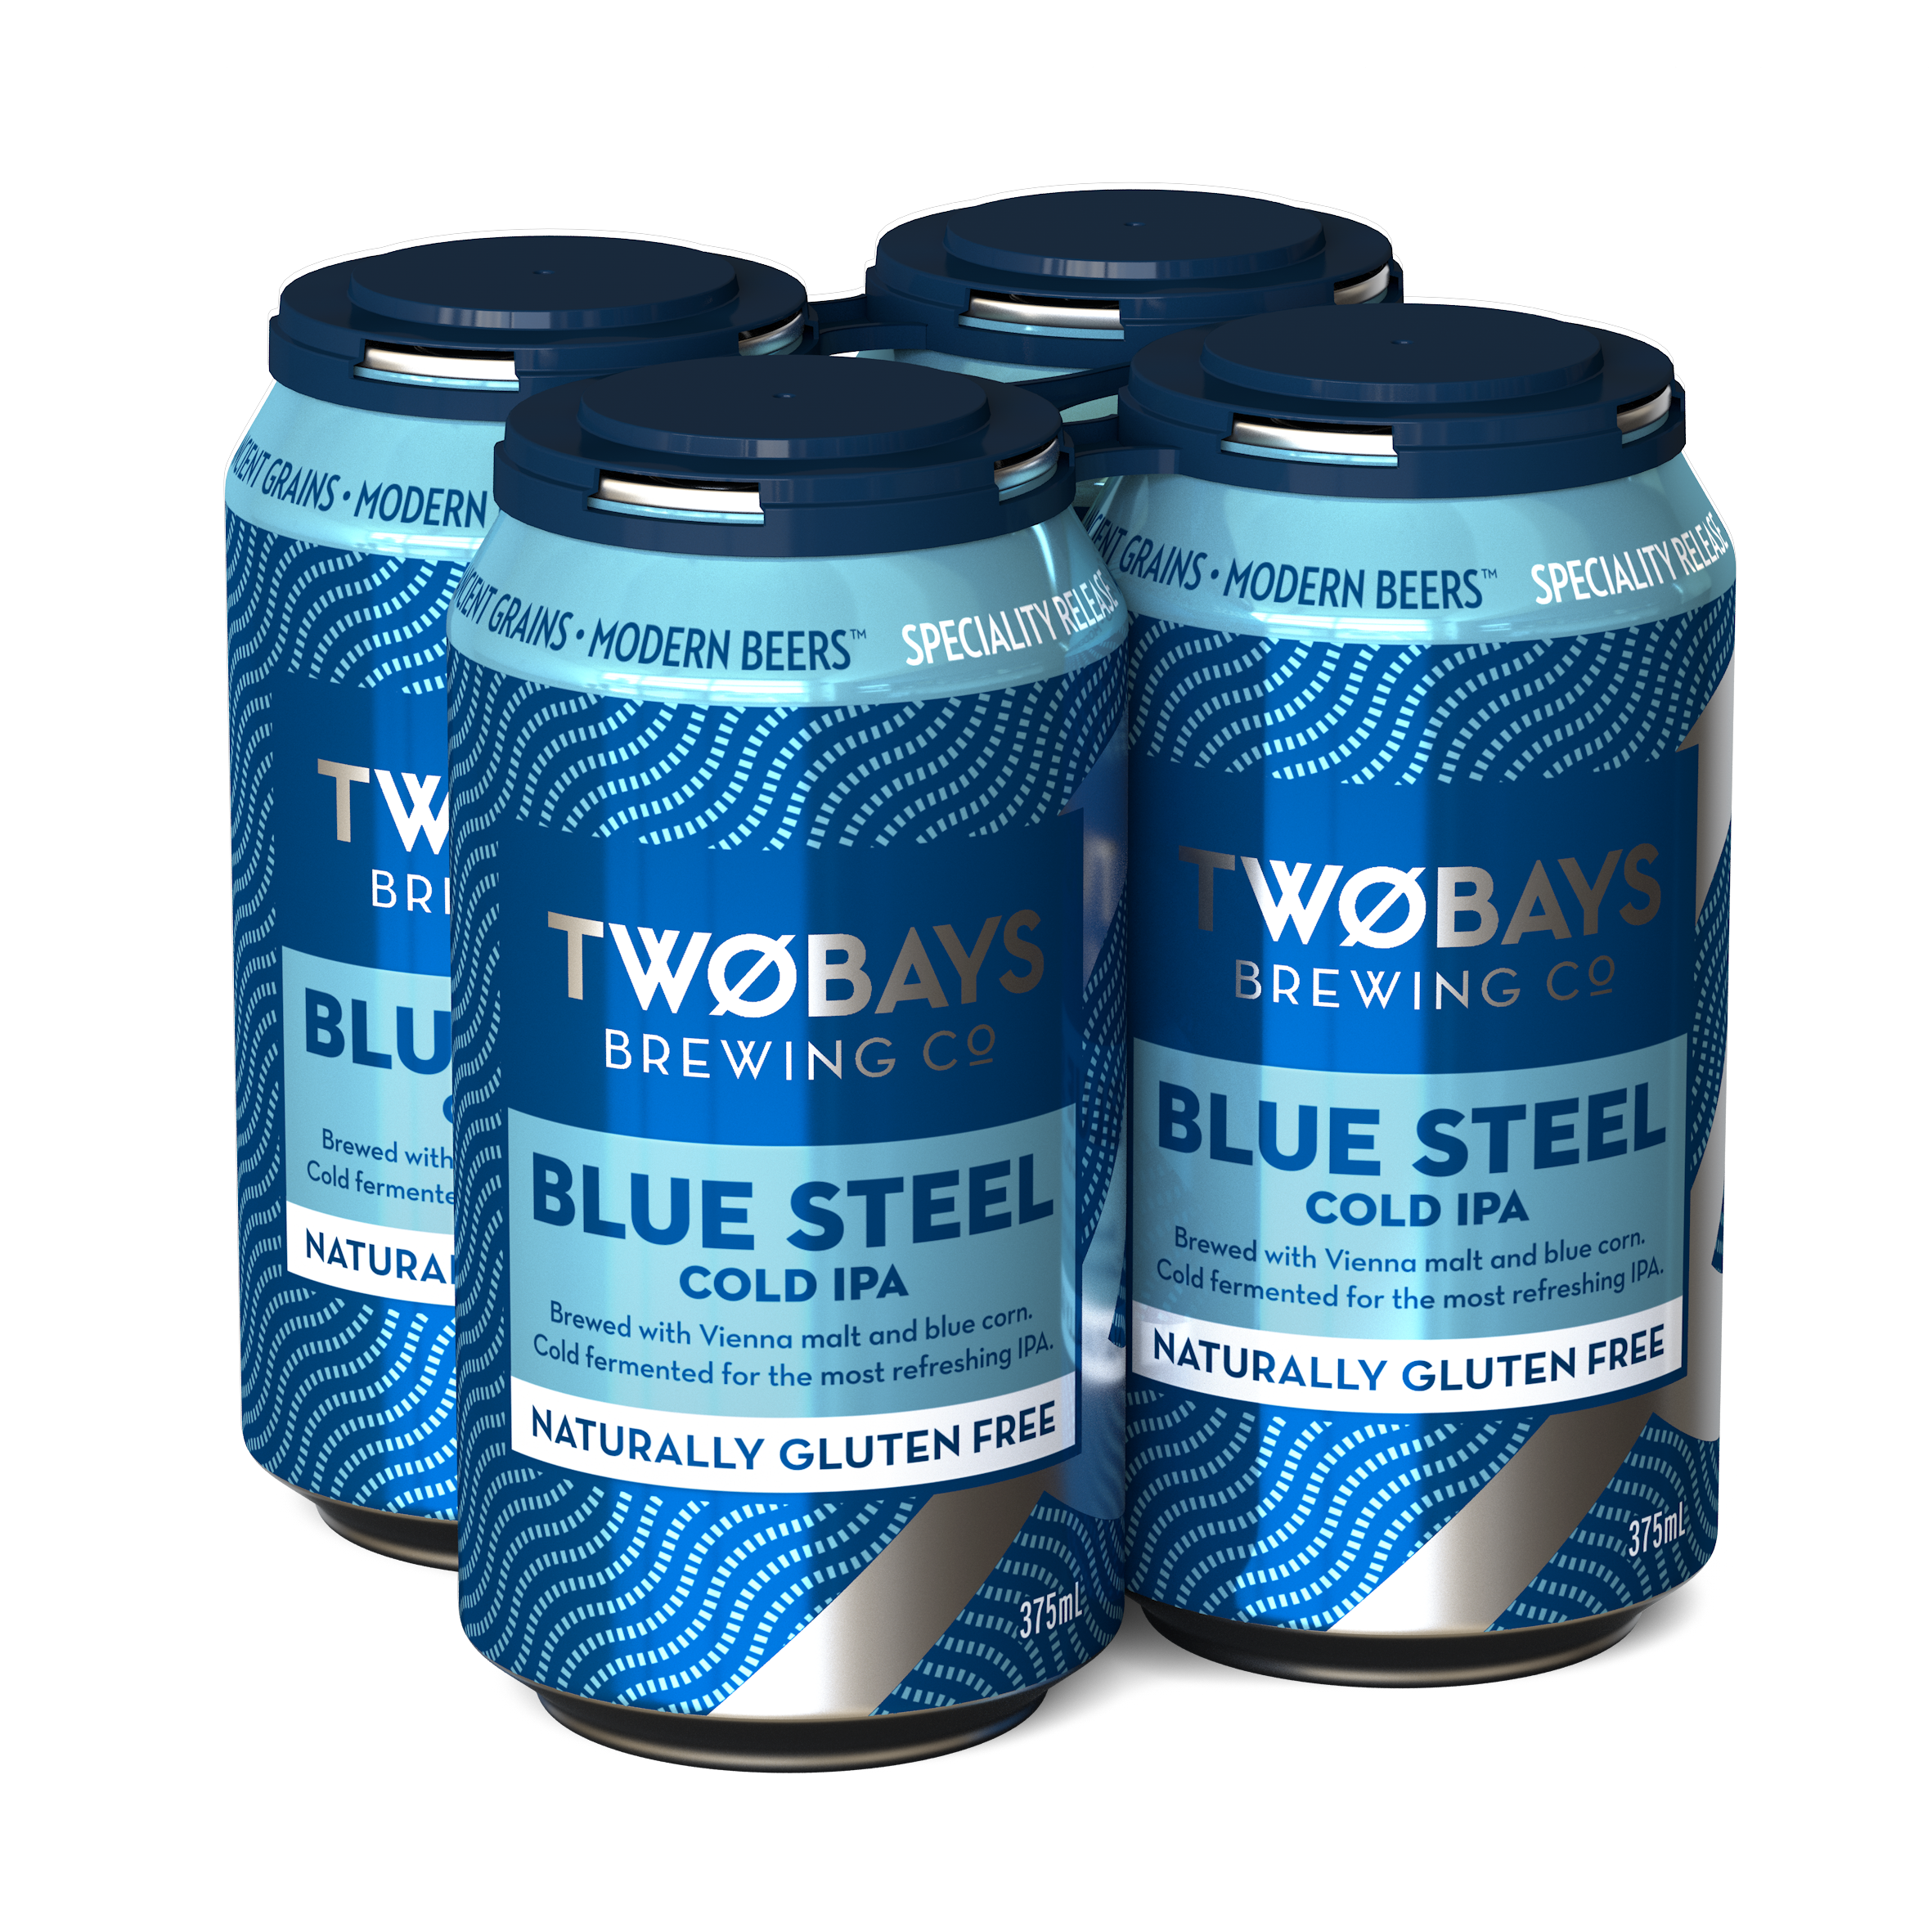 x4-Pack Blue Steel Cold IPA